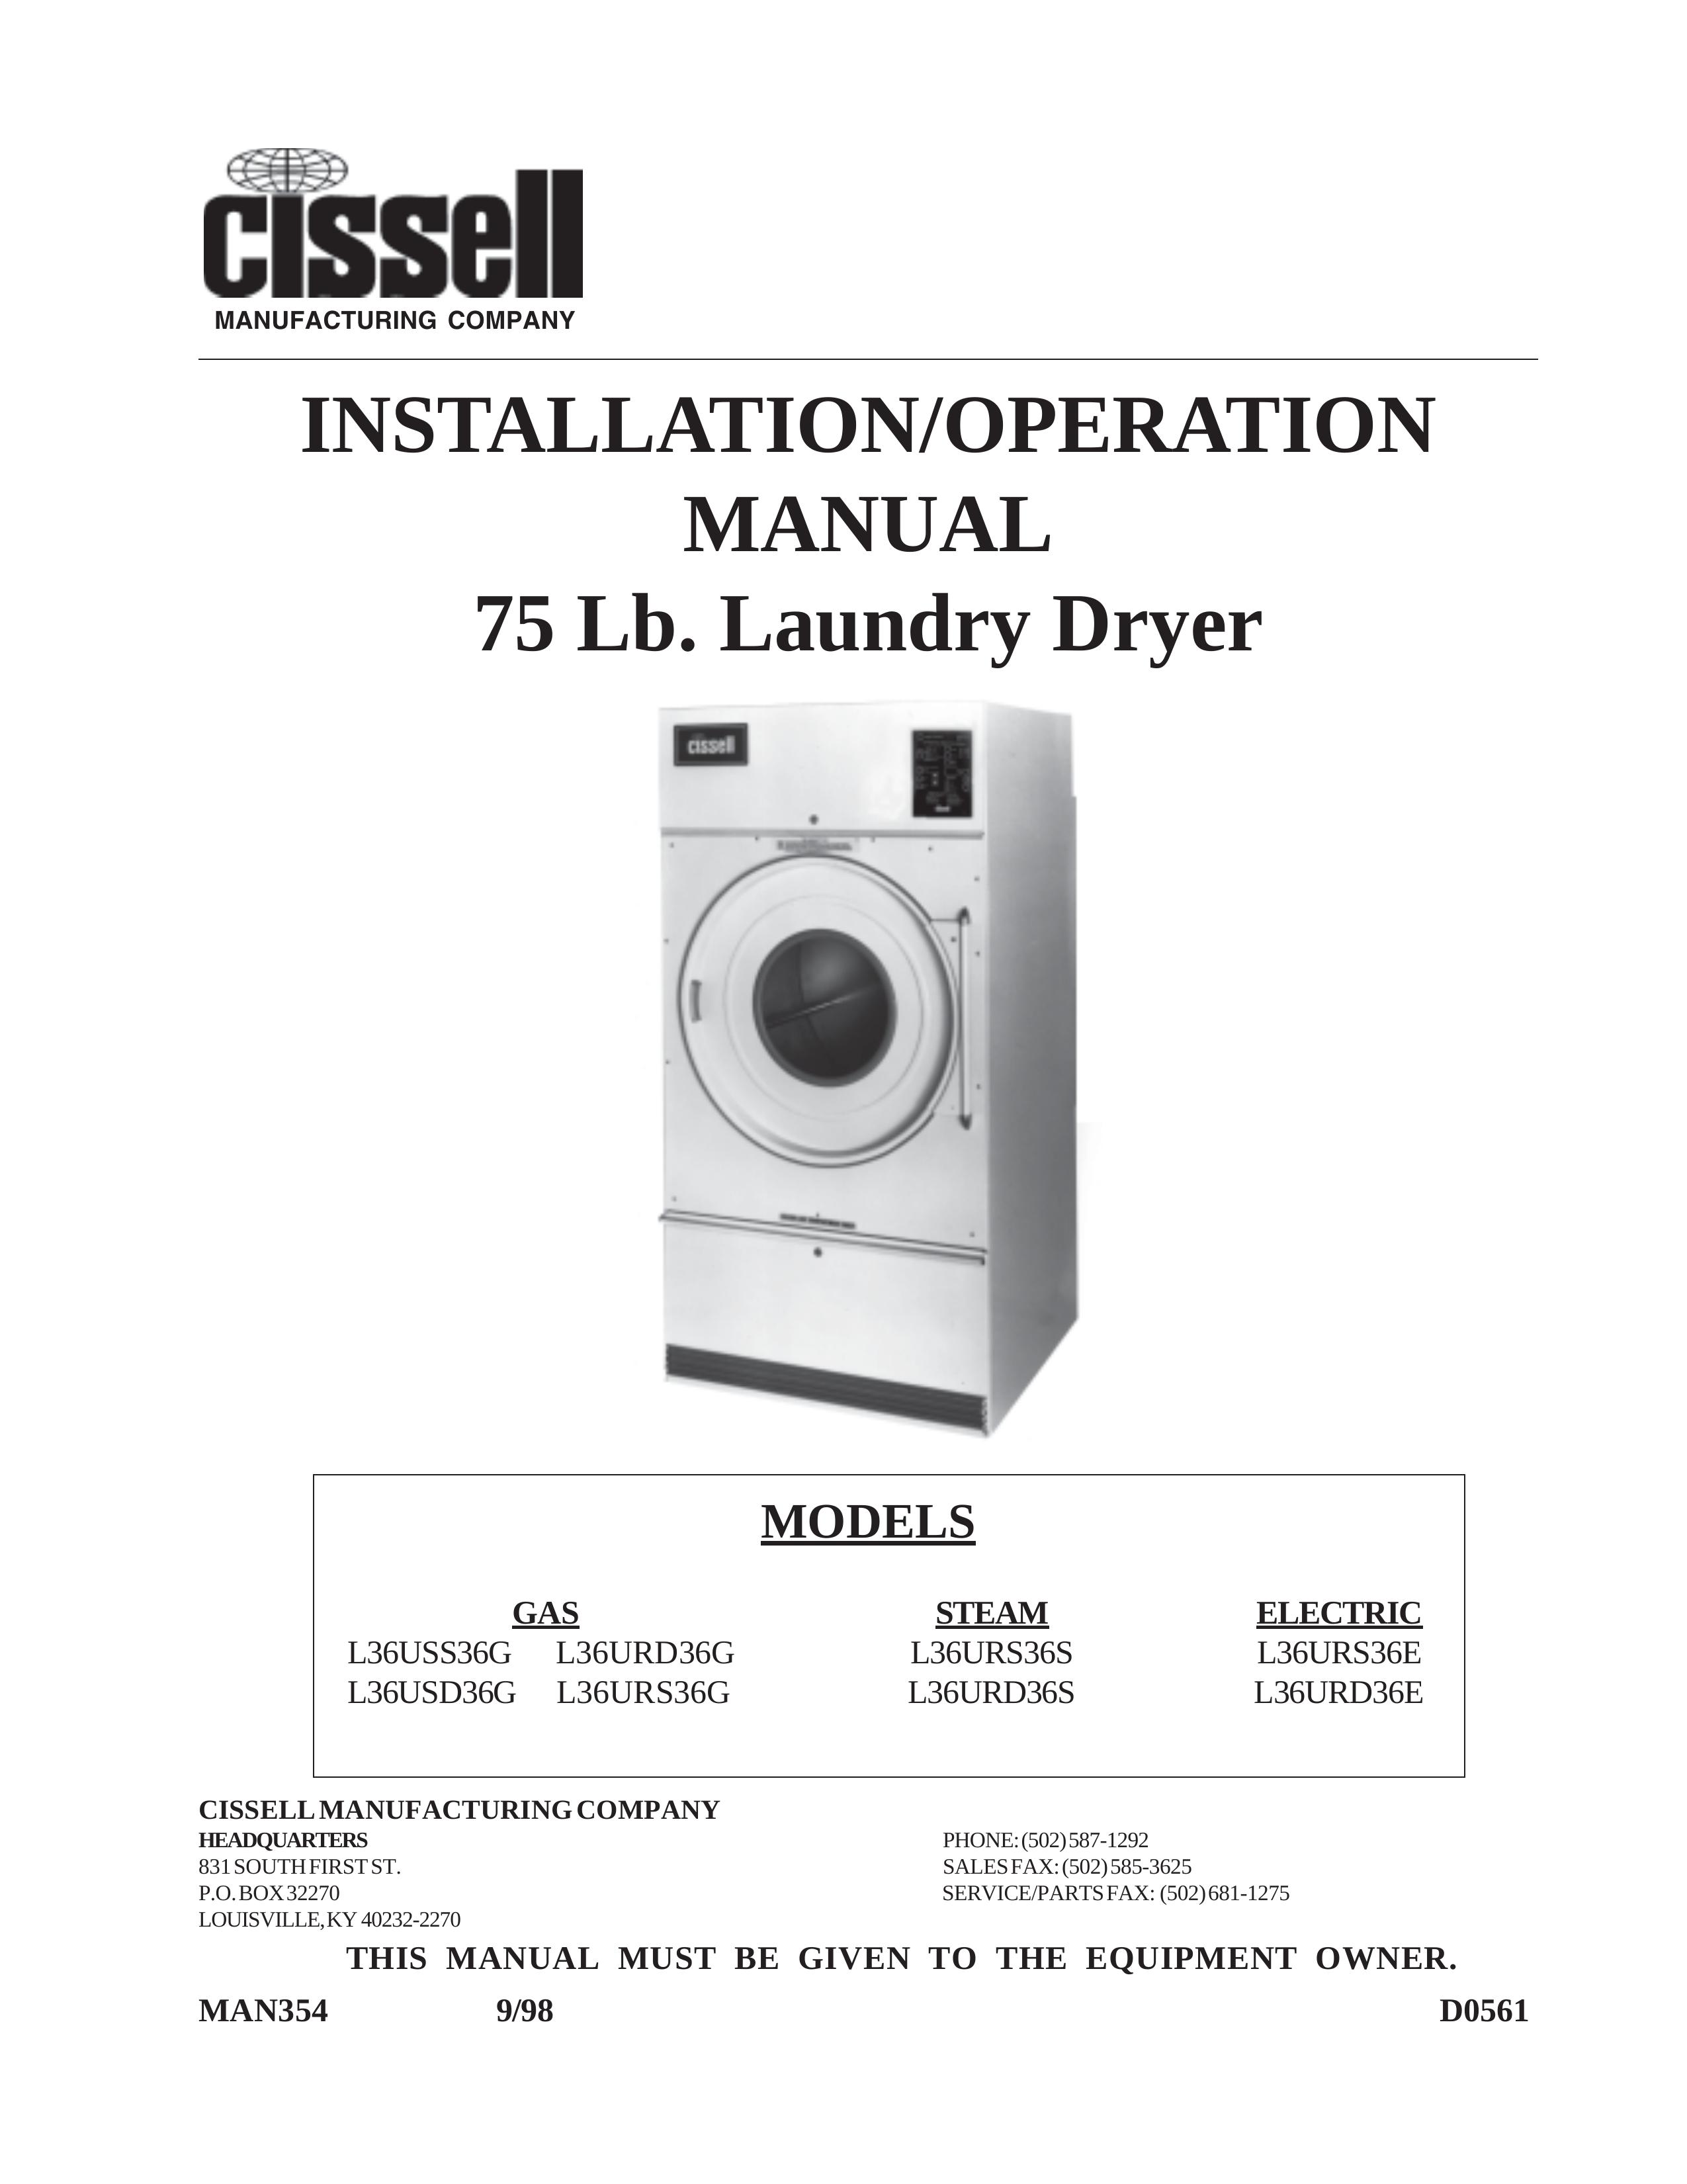 Cissell L36URD36E Clothes Dryer User Manual